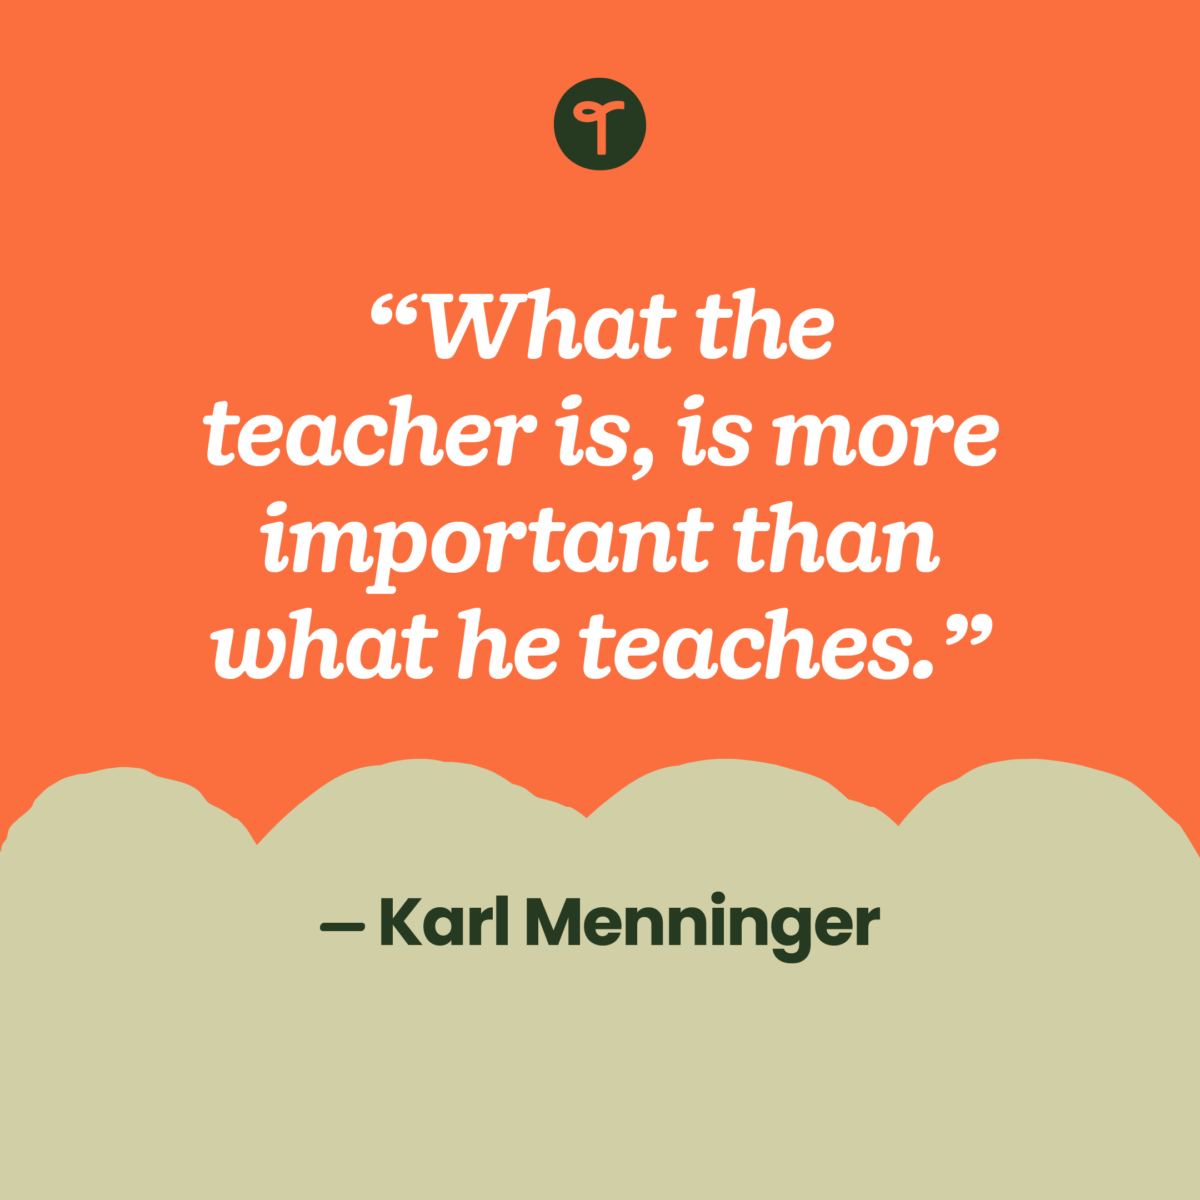 inspirational teacher quote “What the teacher is, is more important than what he teaches.” ― Karl Menninger